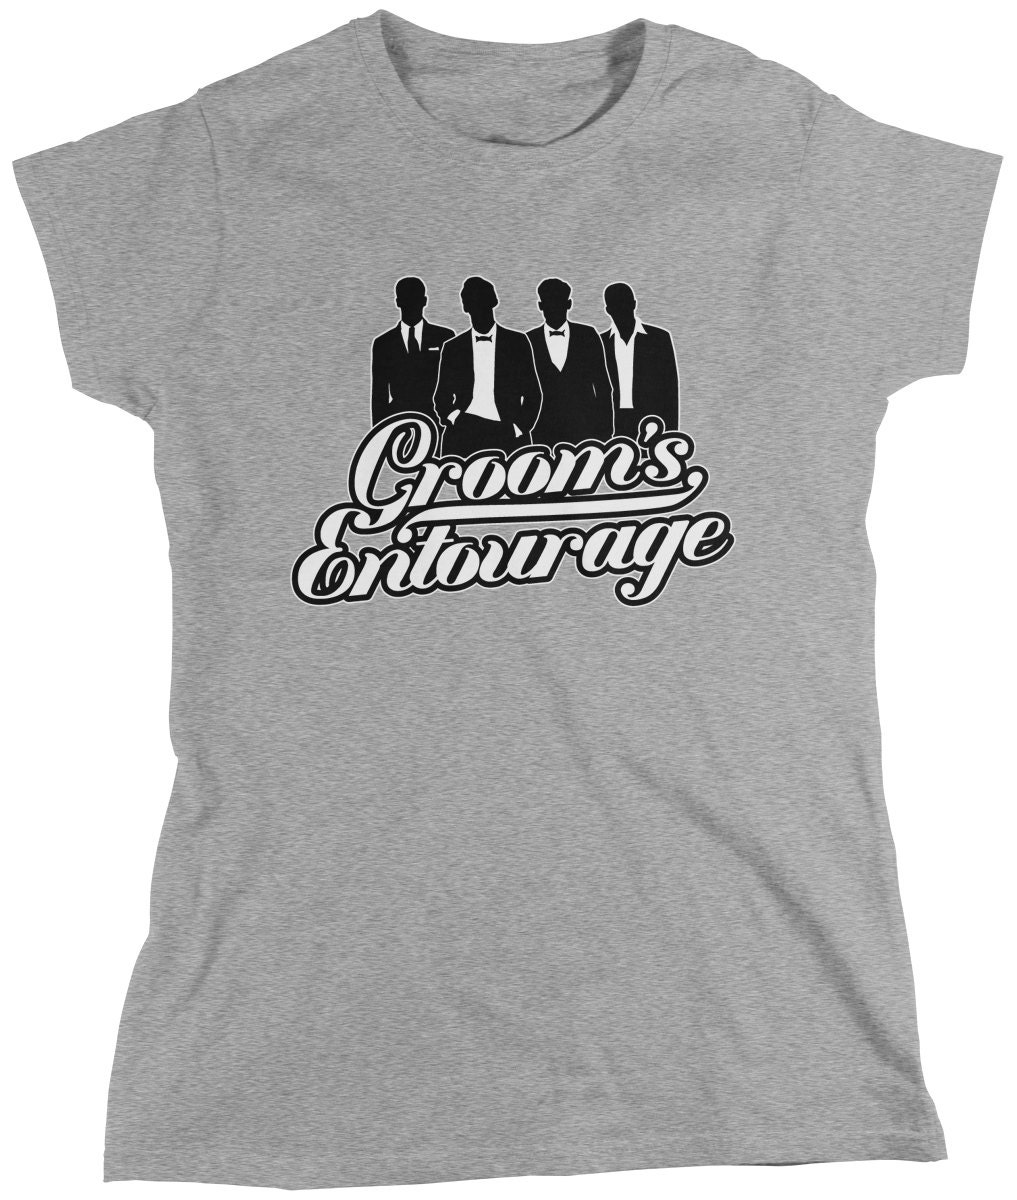 Grooms Entourage Ladie's T-Shirt Friends Groomsmen Women's Wedding Shirts AMD_2029 Family Wedding Party Bachelor Party